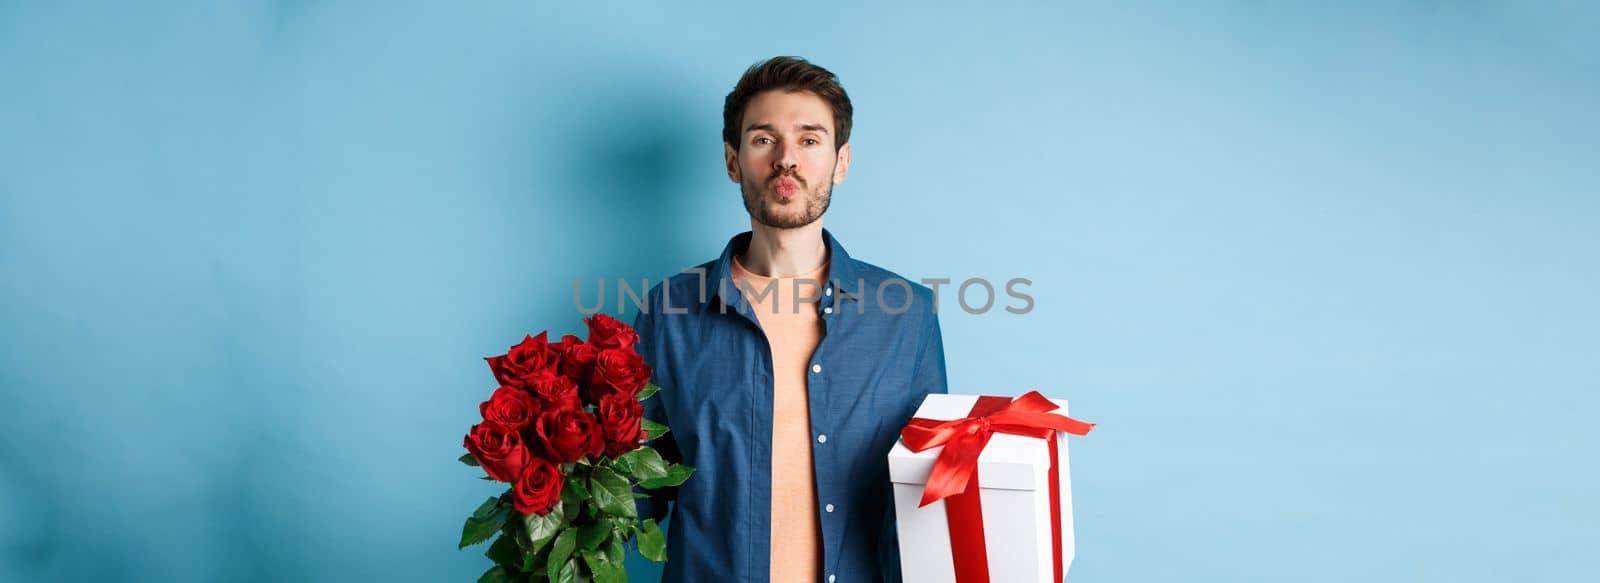 Love and Valentines day concept. Romantic boyfriend pucker lips for kiss, bring bouquet of red roses and gifts on date, standing over blue background.